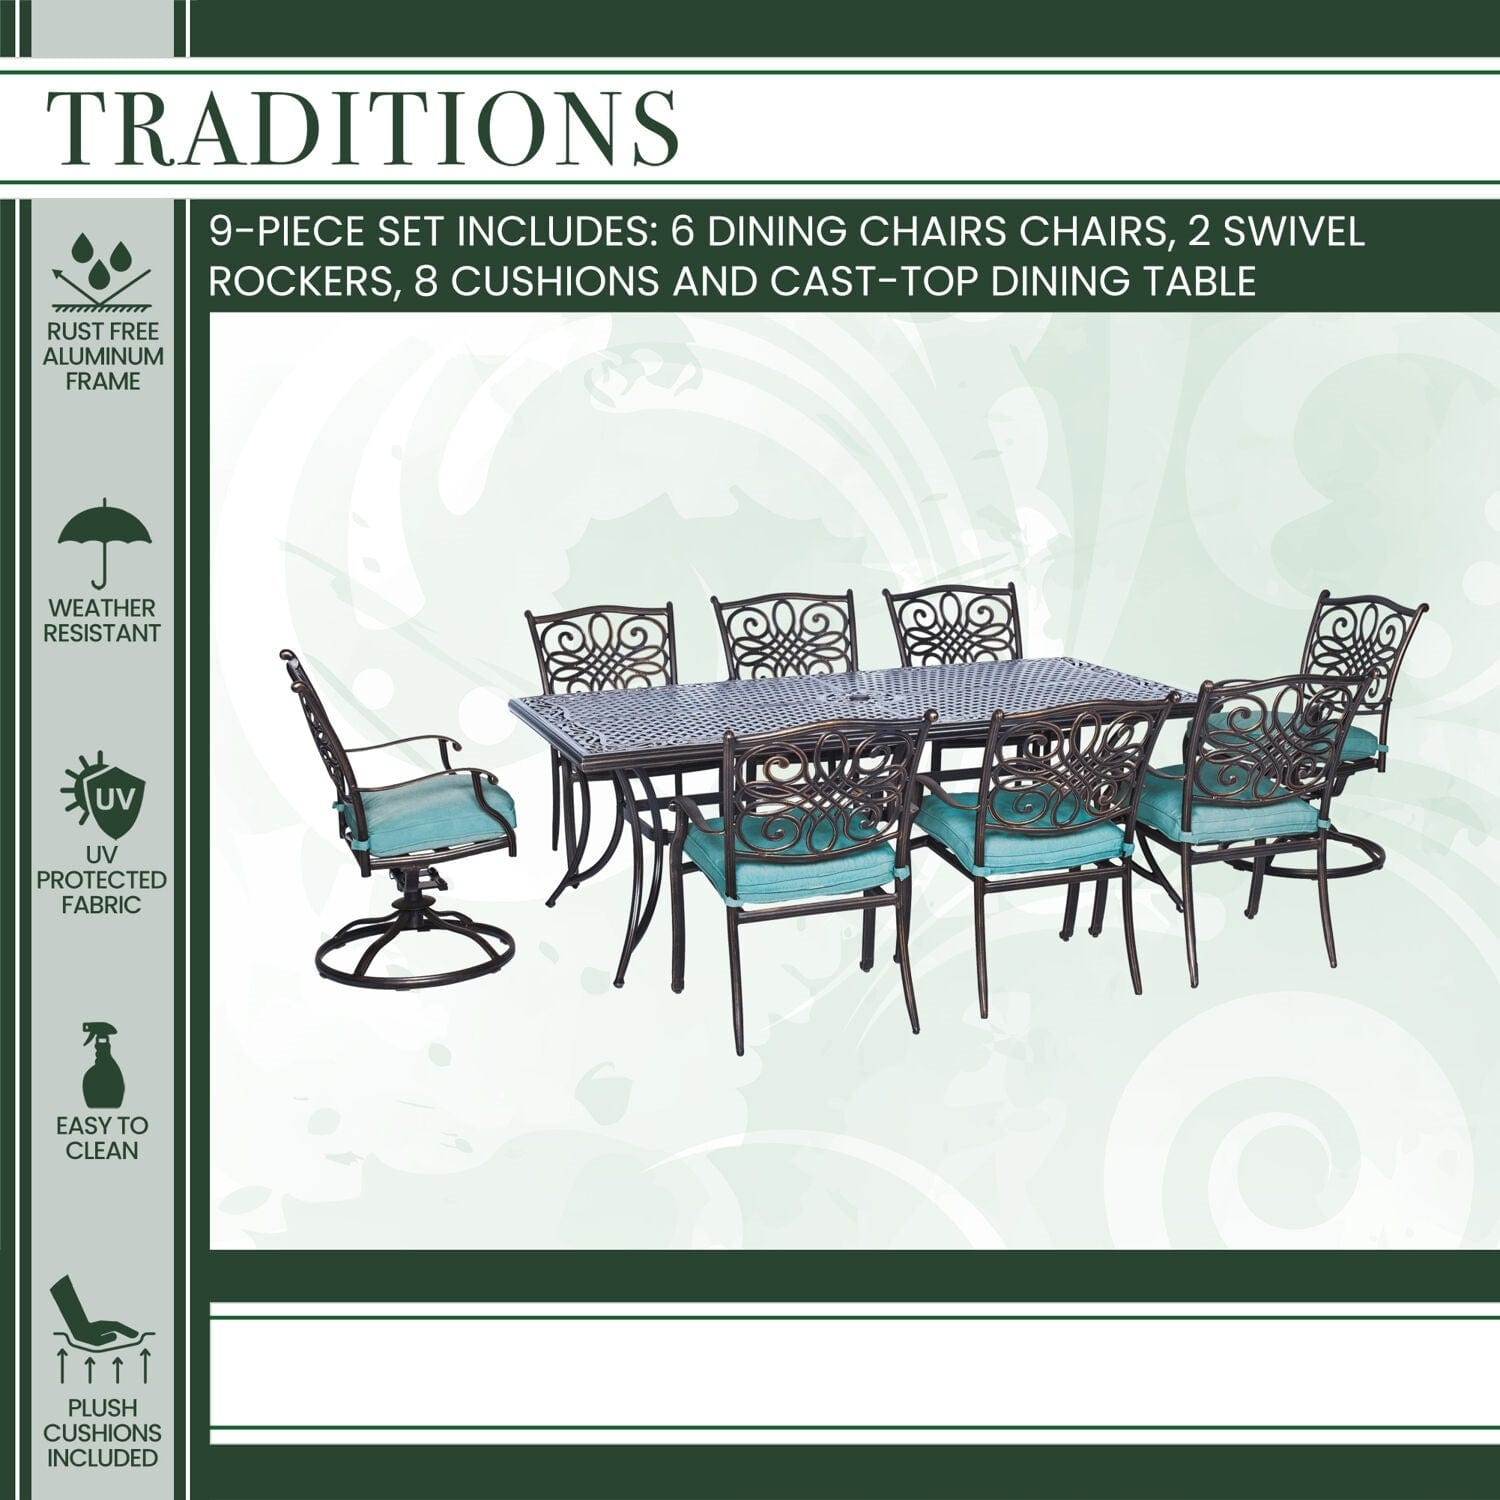 Hanover Outdoor Dining Set Hanover - Traditions 9-Piece Aluminum Frame Dining Set in Blue with 6 Dining Chairs, 2 Benches, and a 42" x 84" Cast-Top Dining Table |  	TRAD9PCSW2-BLU